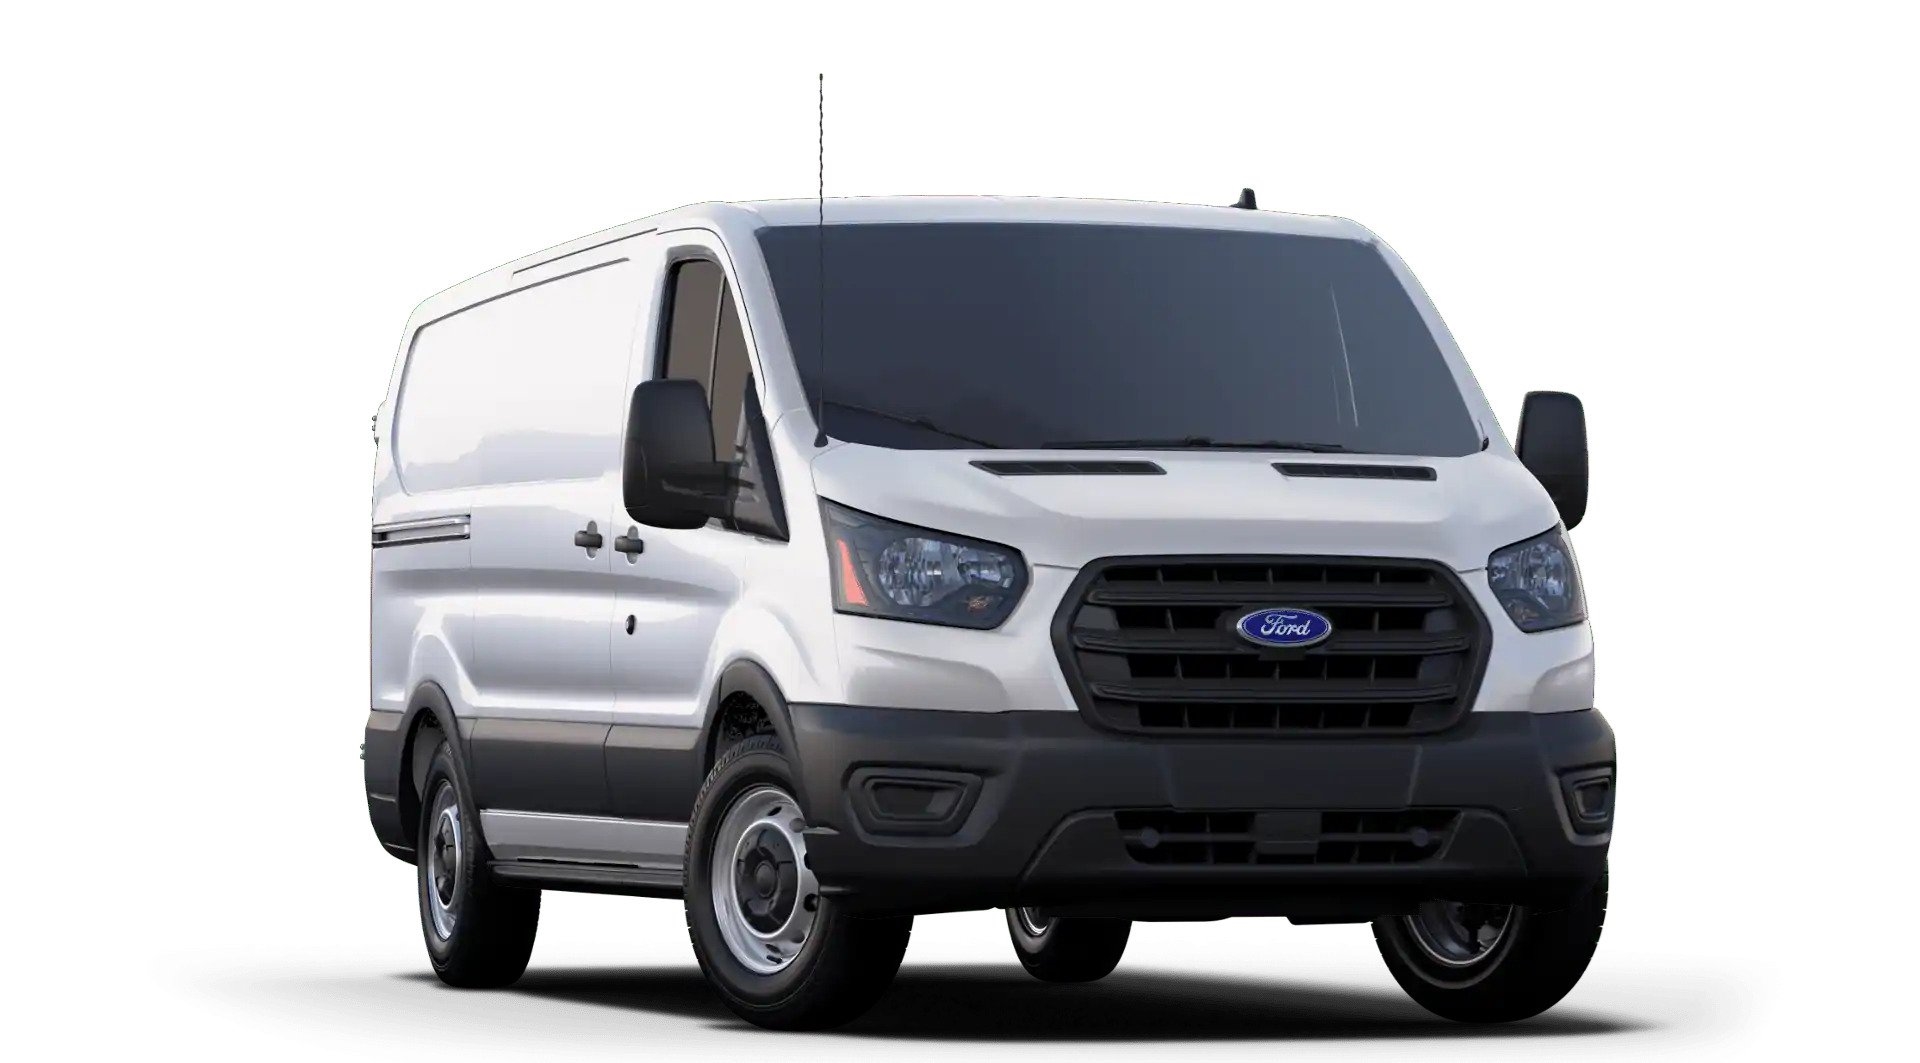 2020 Ford Transit Cargo Van 250 Full Specs, Features and Price | CarBuzz